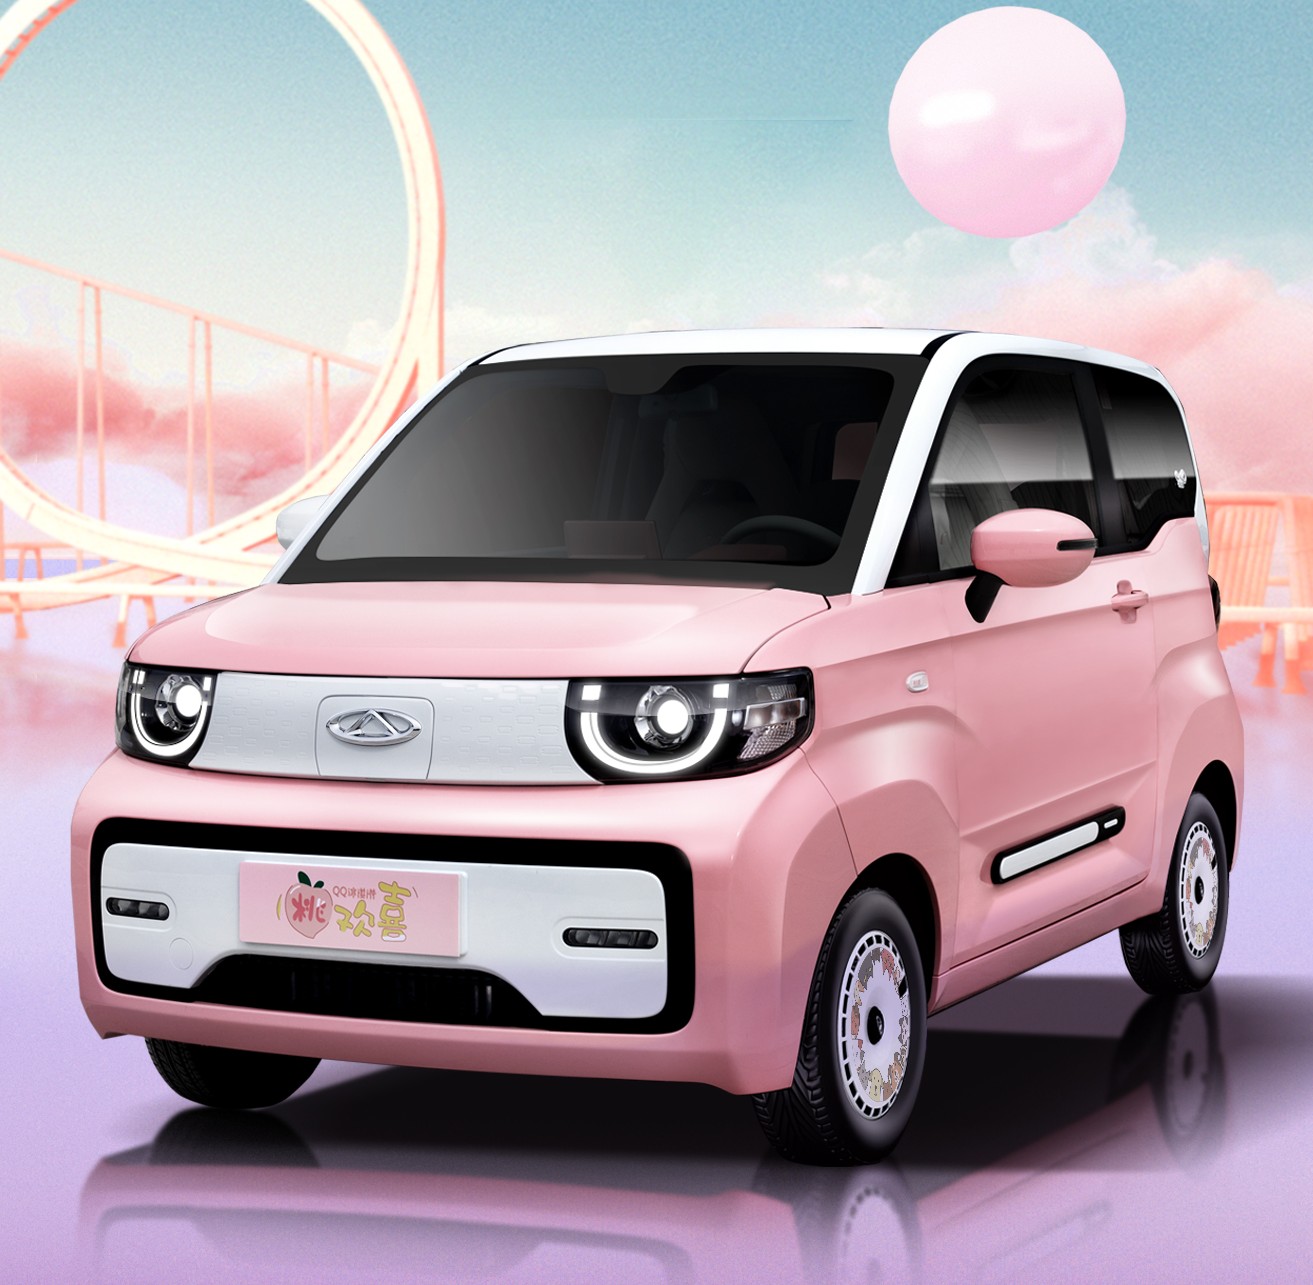 Hi Chinese Lady, Would You Like To Have A QQ Ice Cream Joyous Peach As Your Car? Chery Thinks You Do.